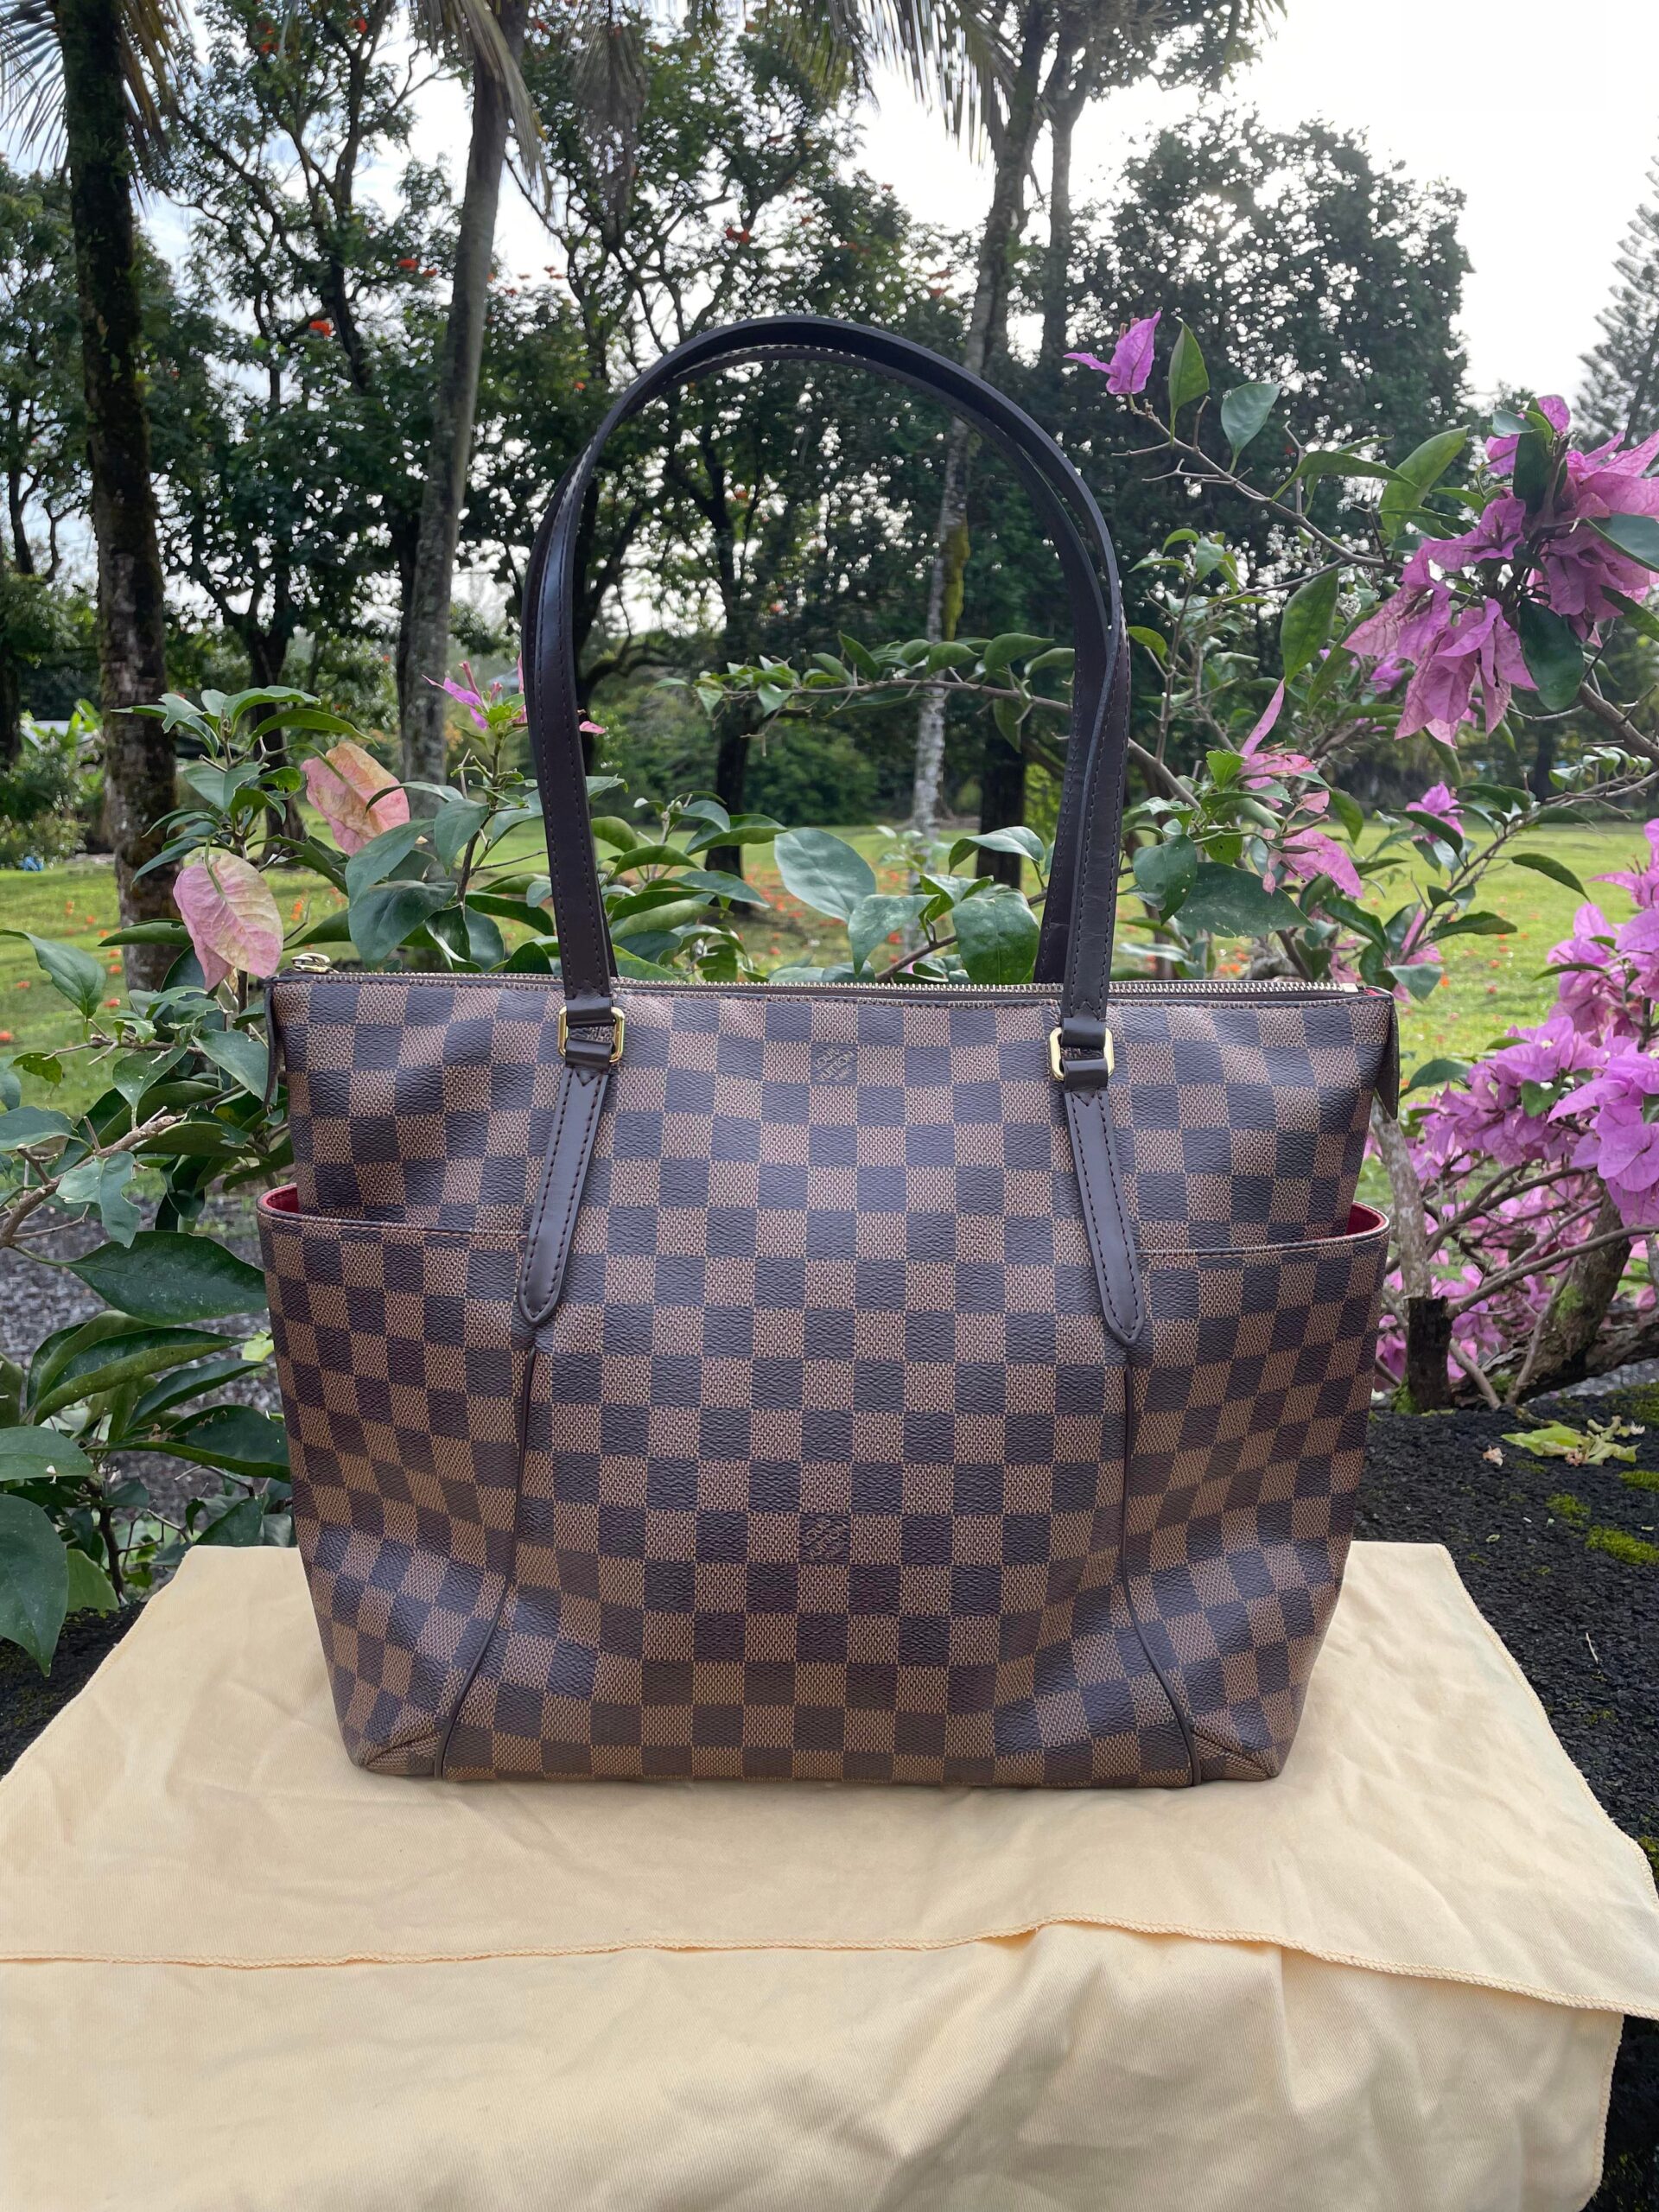 The Louis Vuitton Totally MM in Damier Ebene. And what a beauty this o